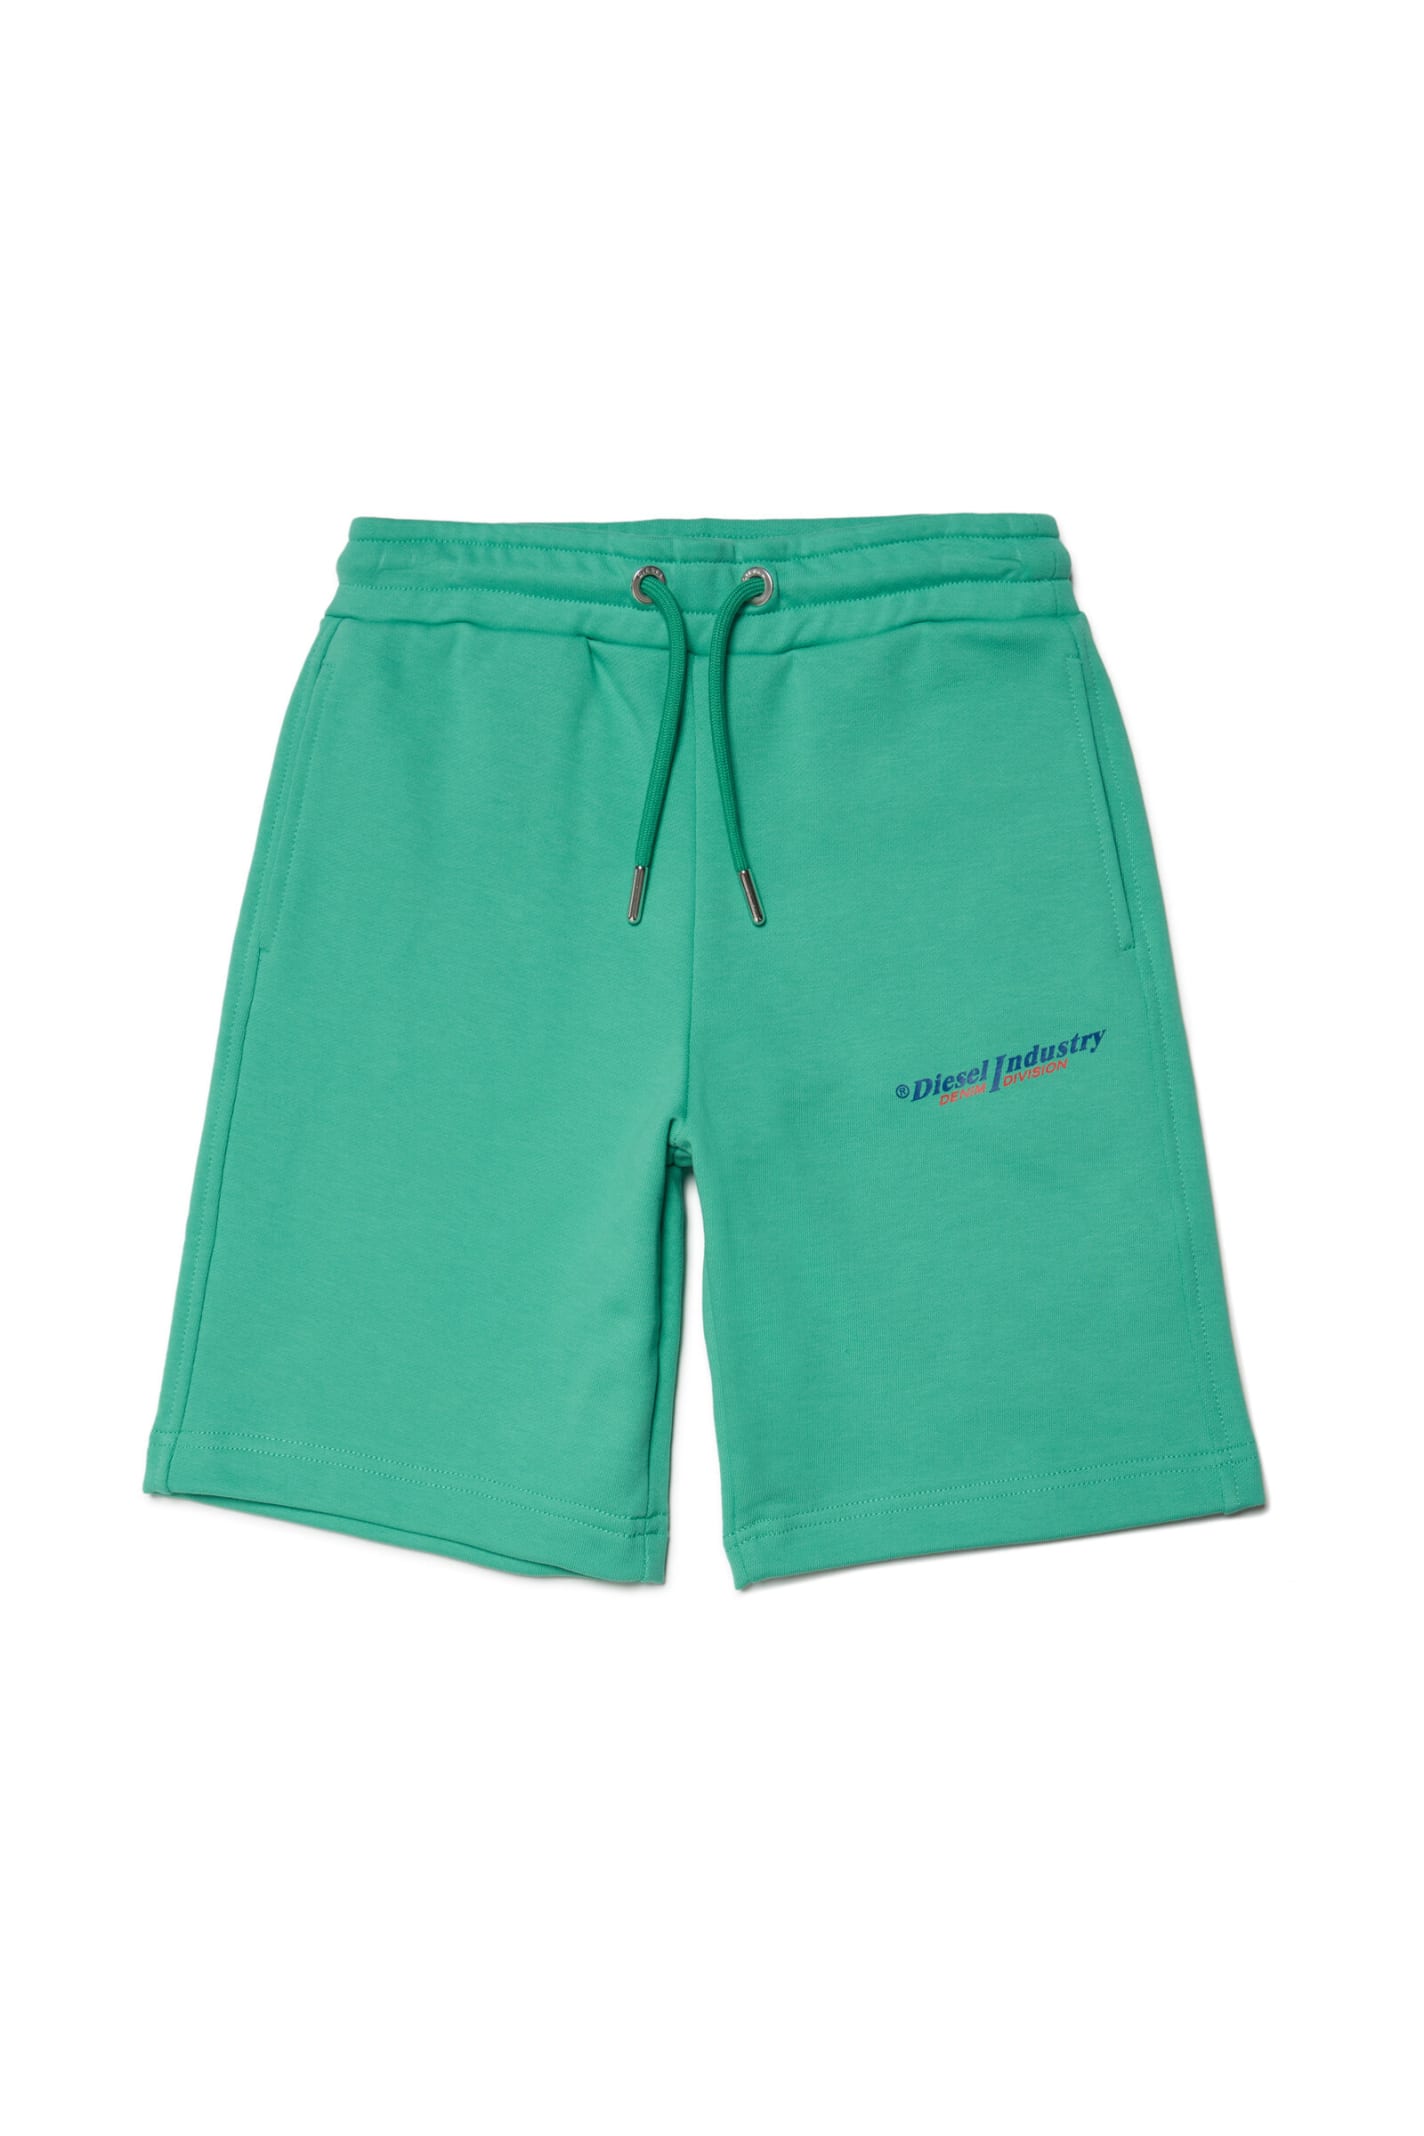 DIESEL PDADOIND SHORTS DIESEL GREEN COTTON SHORTS WITH LOGO AND DRAWSTRING WAISTBAND